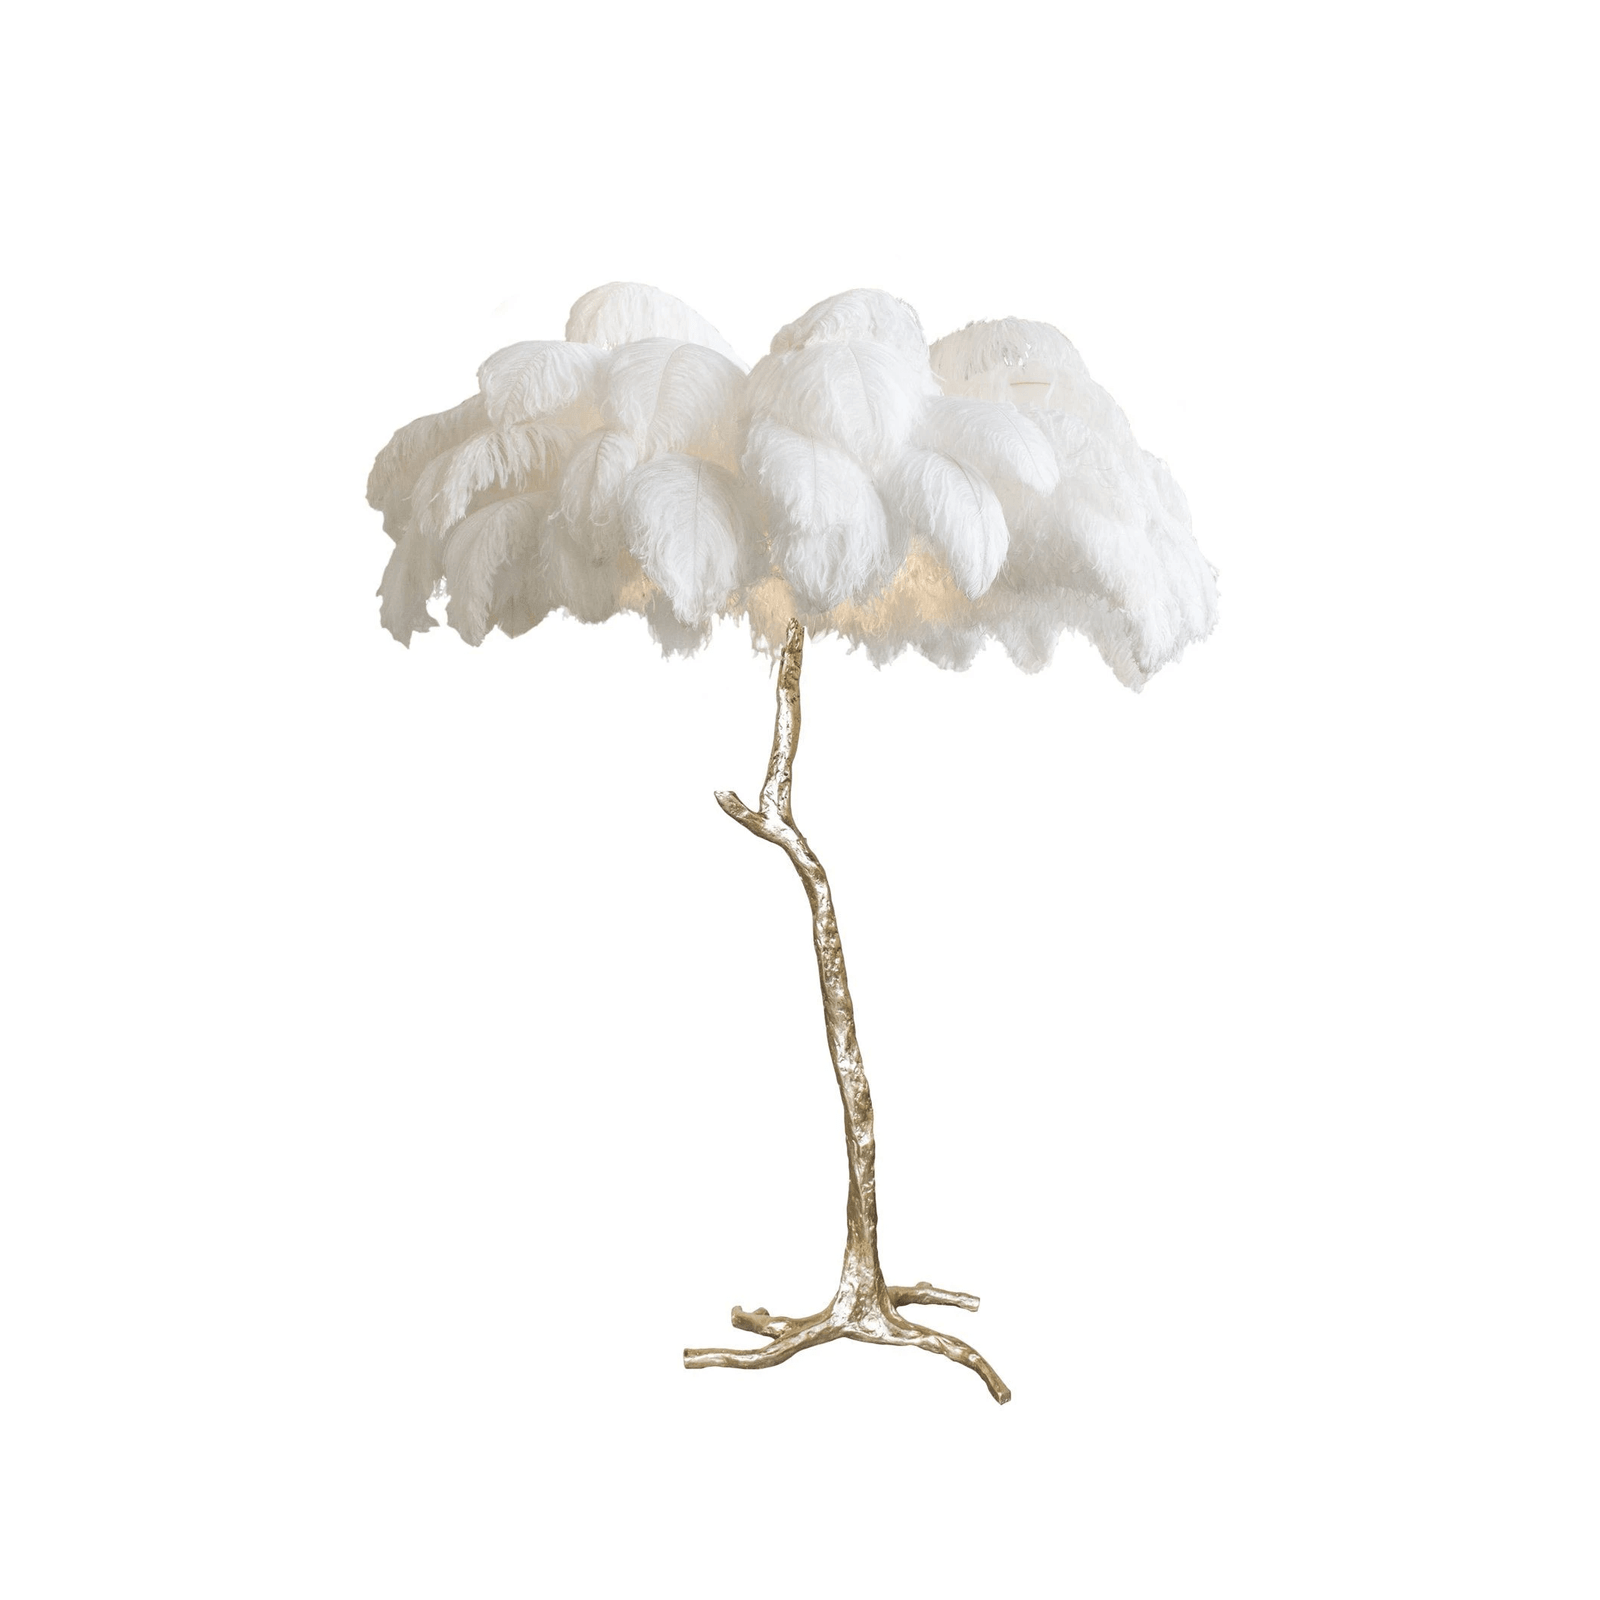 Polished Brass Ostrich Feather Floor Lamp with a Diameter of 39.4" and Height of 63", or Diameter of 100cm and Height of 160cm, in White Color